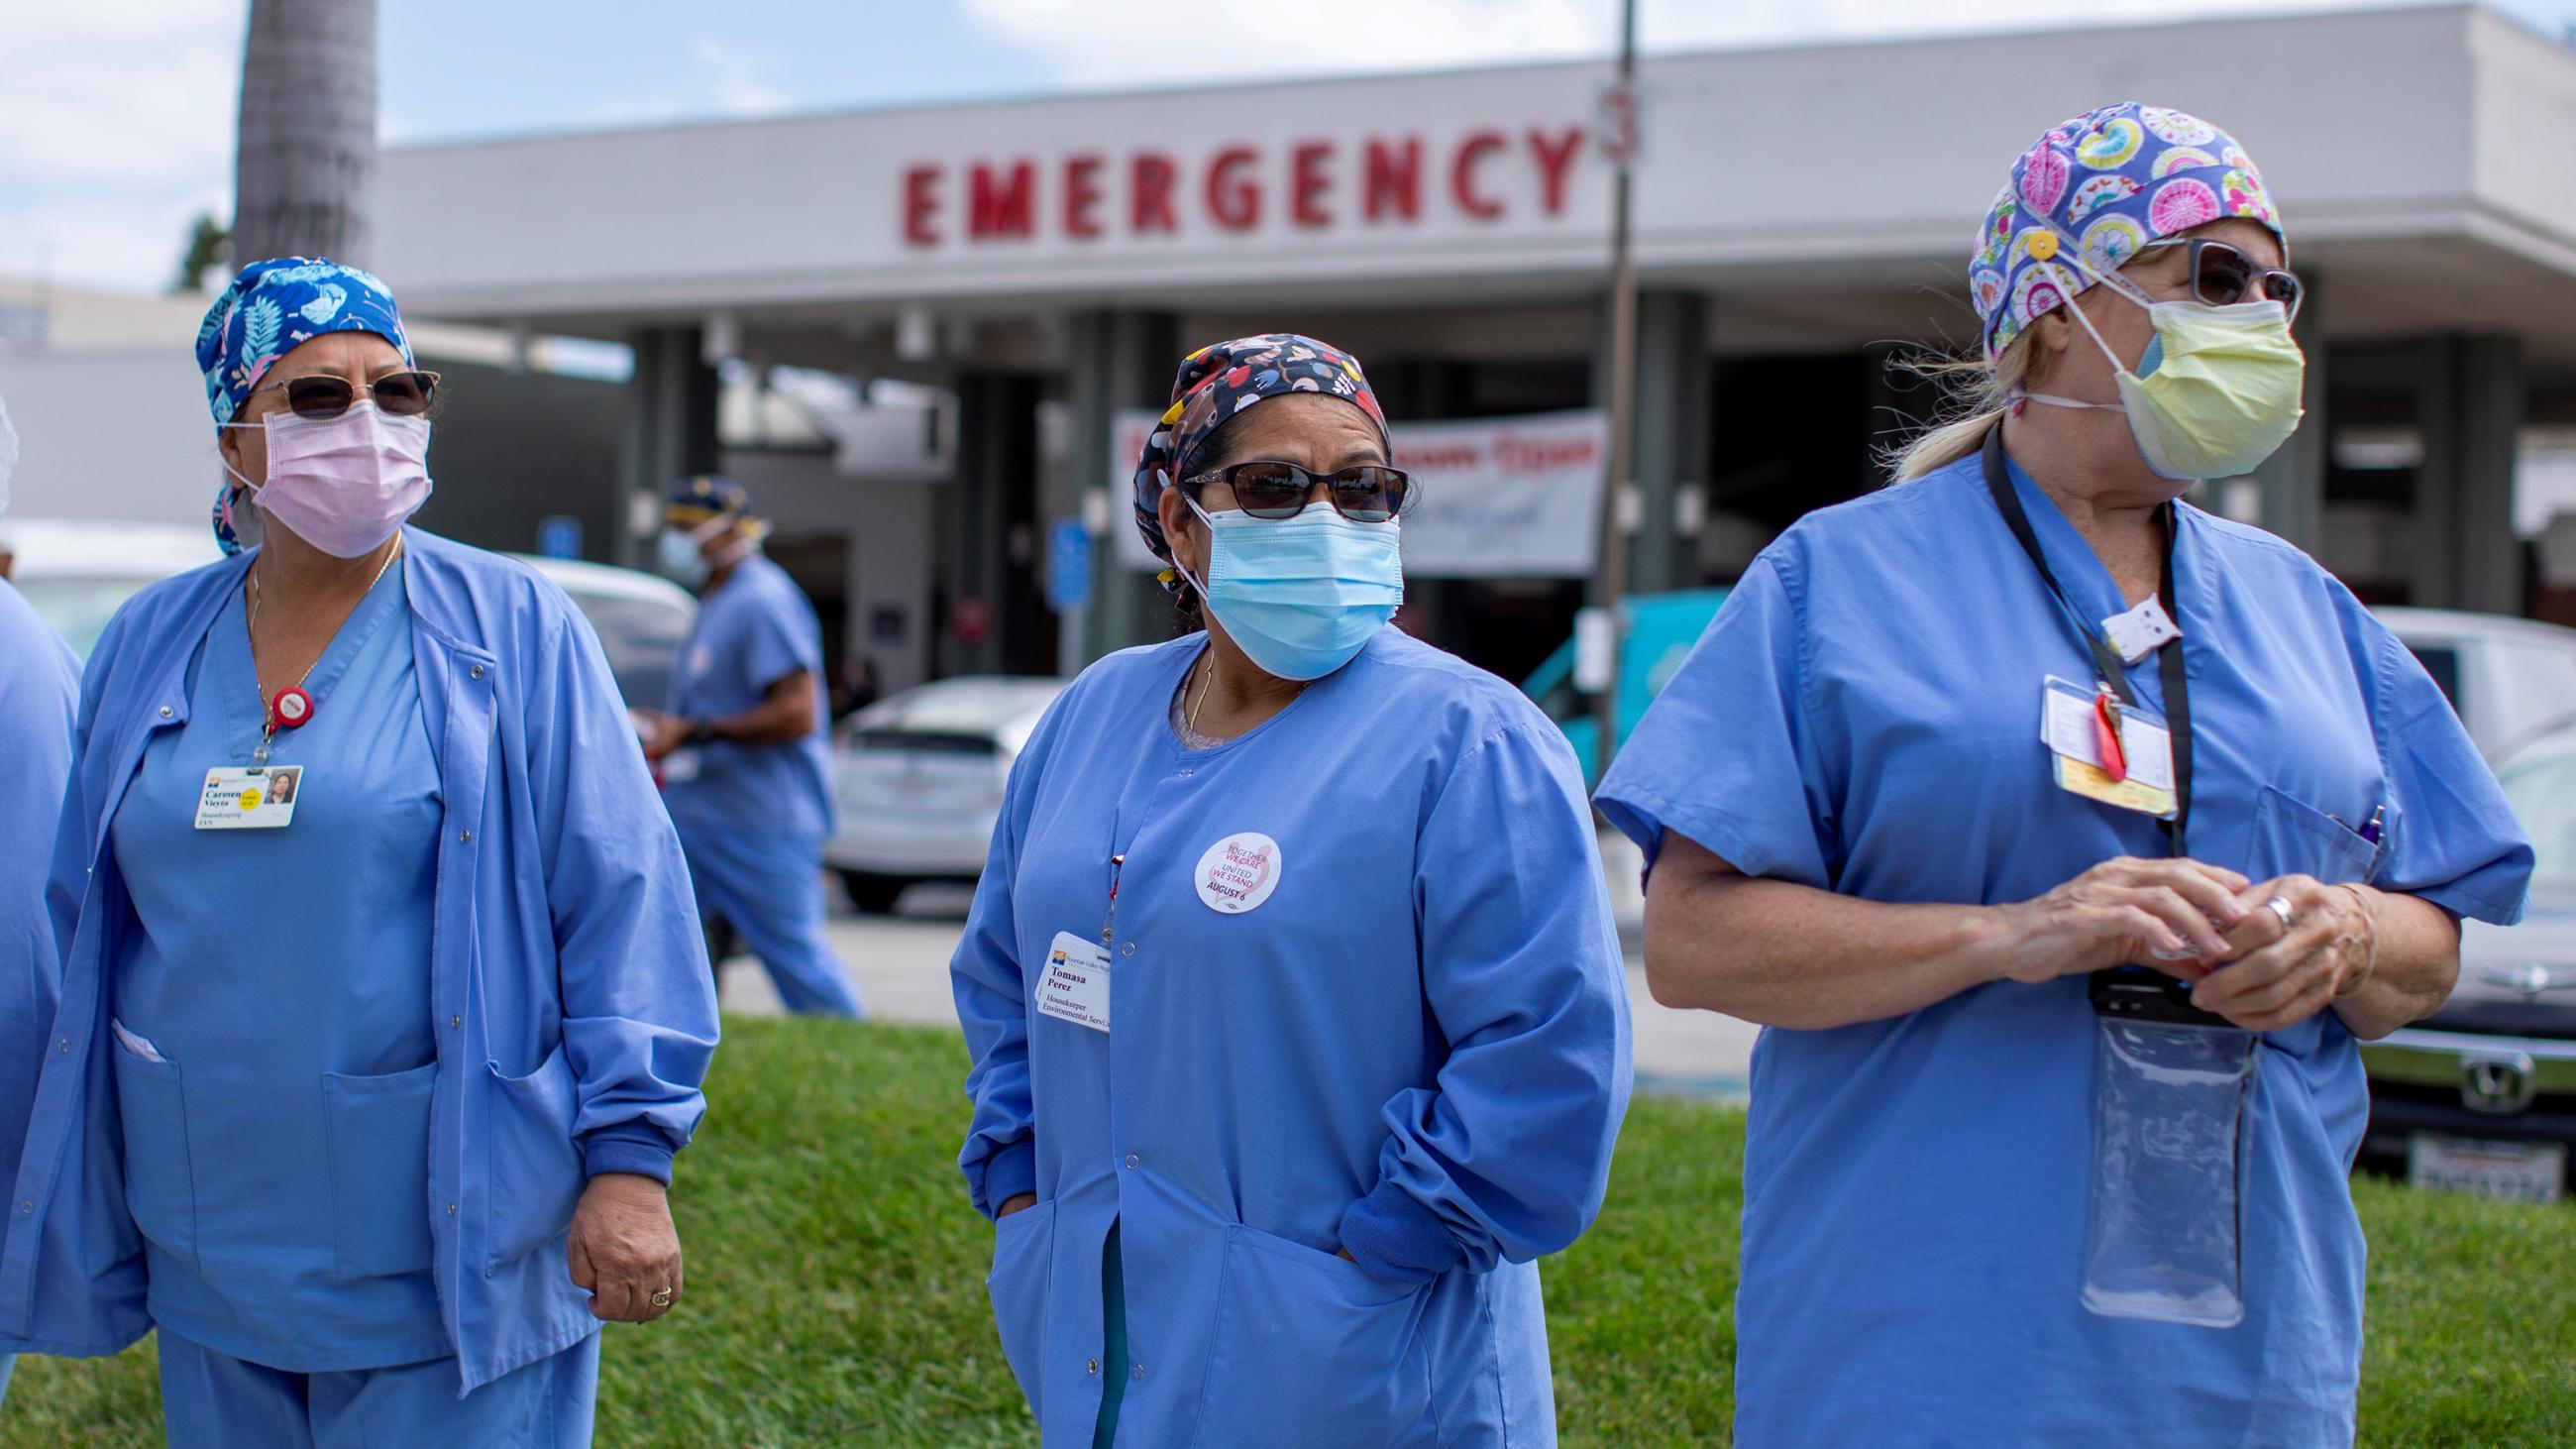 The photo shows a collection of health workers in blue scrubs protesting in front of a hospital entrance adorned with the word "EMERGENCY." 